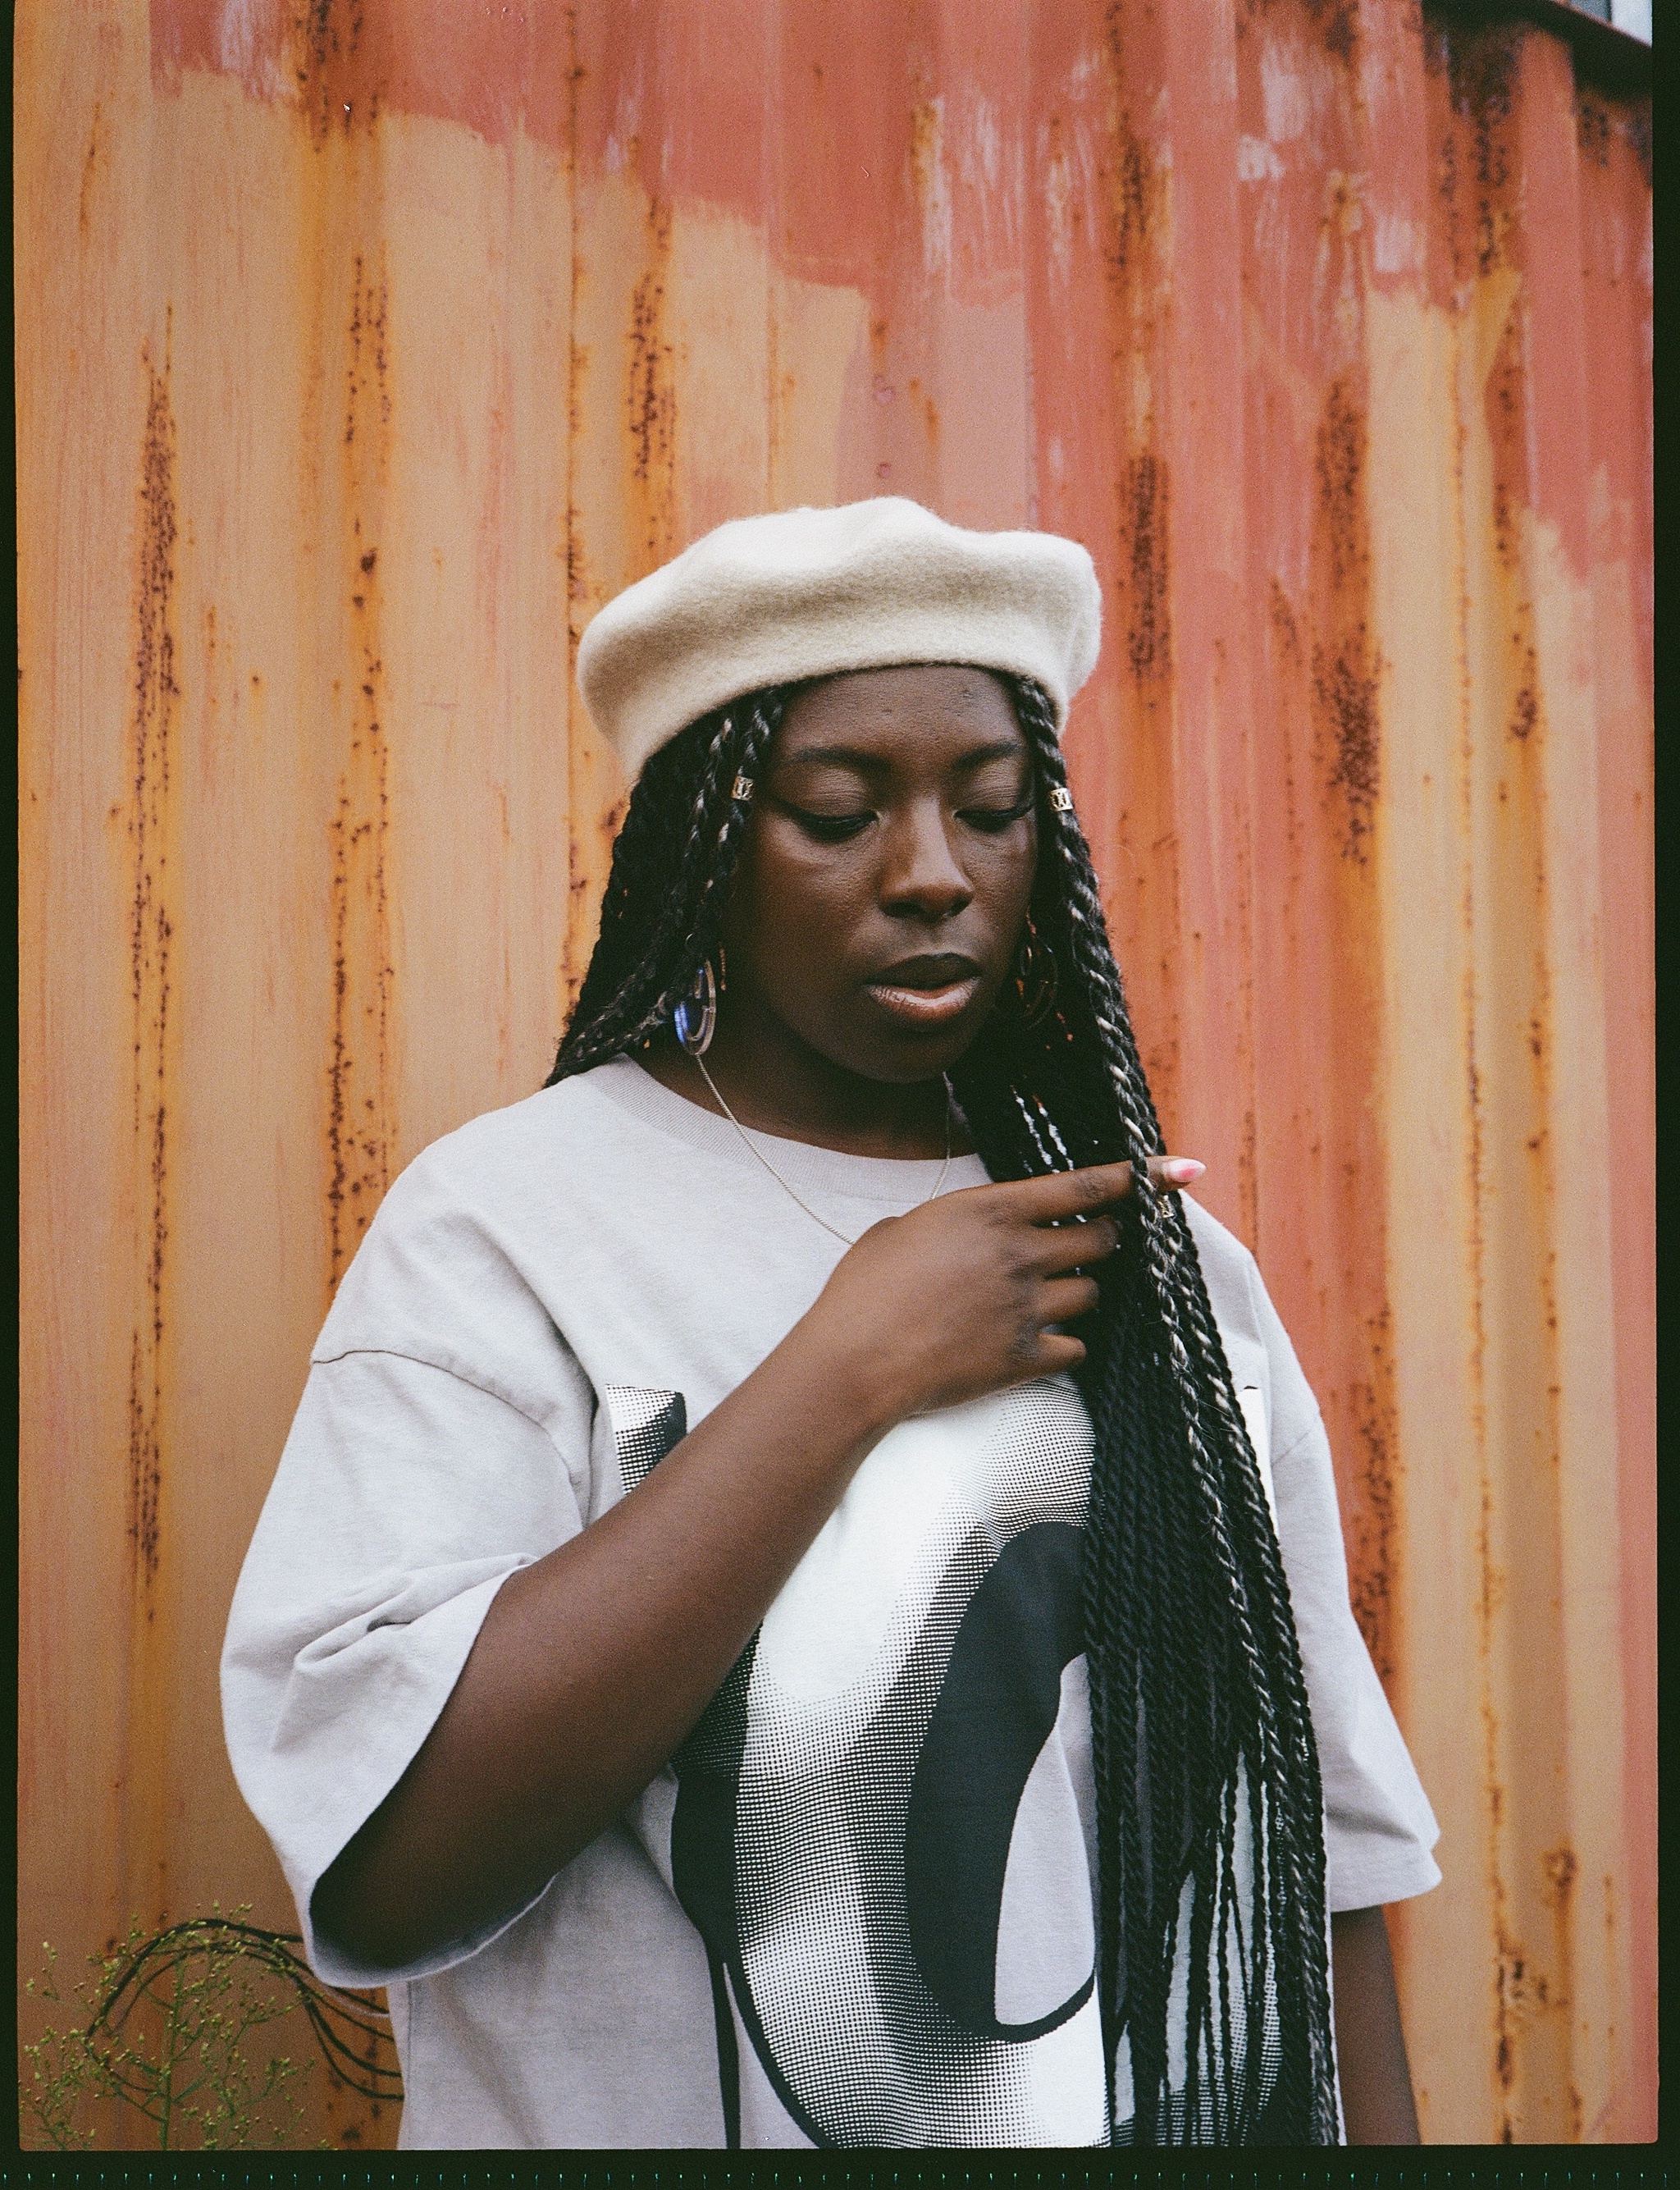 Anz photographed by Bolade Banjo for Benji B's Mixtape in i-D’s The Royalty Issue, no. 370, Winter 2022